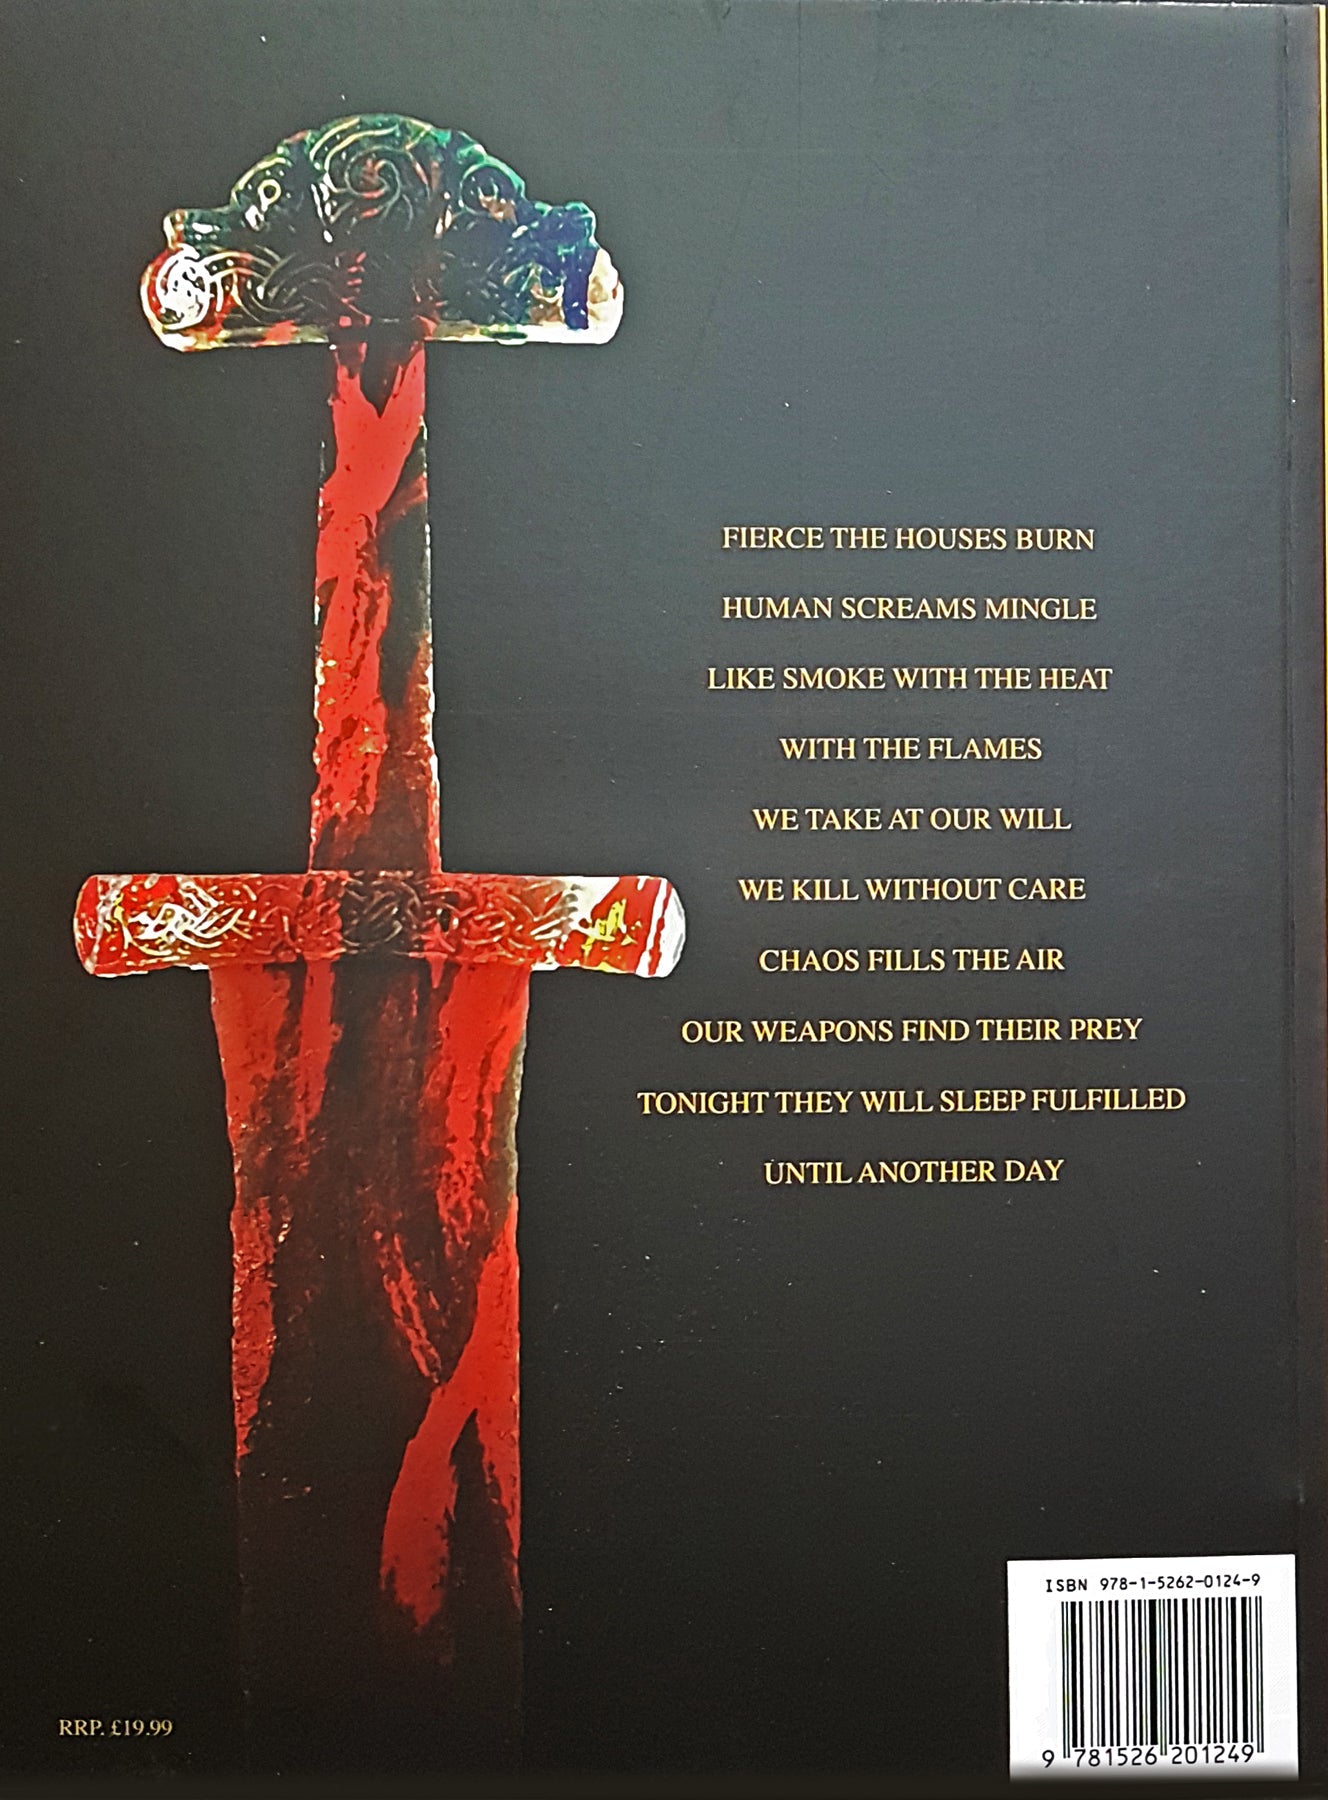 Vikings - Swords Dripping Gold - Silver - Blood - Book - Back Cover